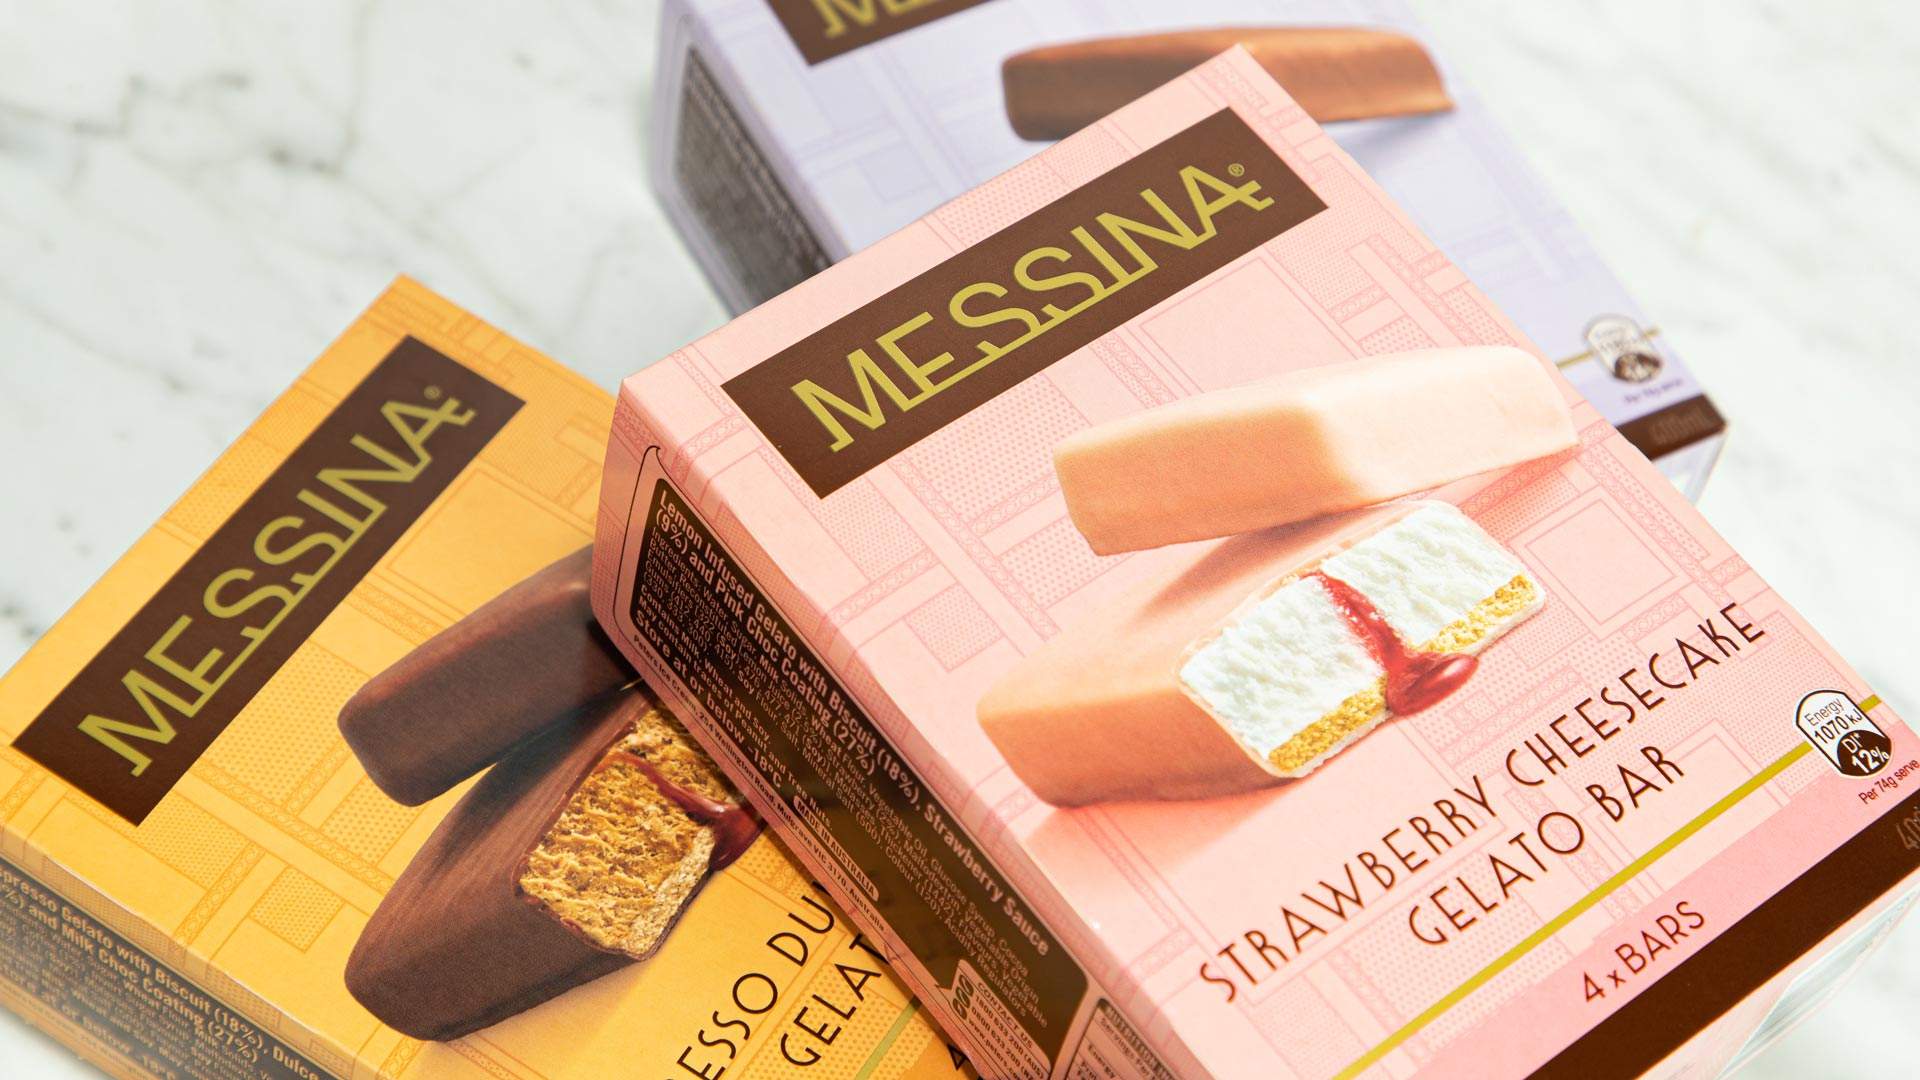 Gelato Messina Is Now Selling Chocolate-Covered Ice Cream Bars at Australian Supermarkets